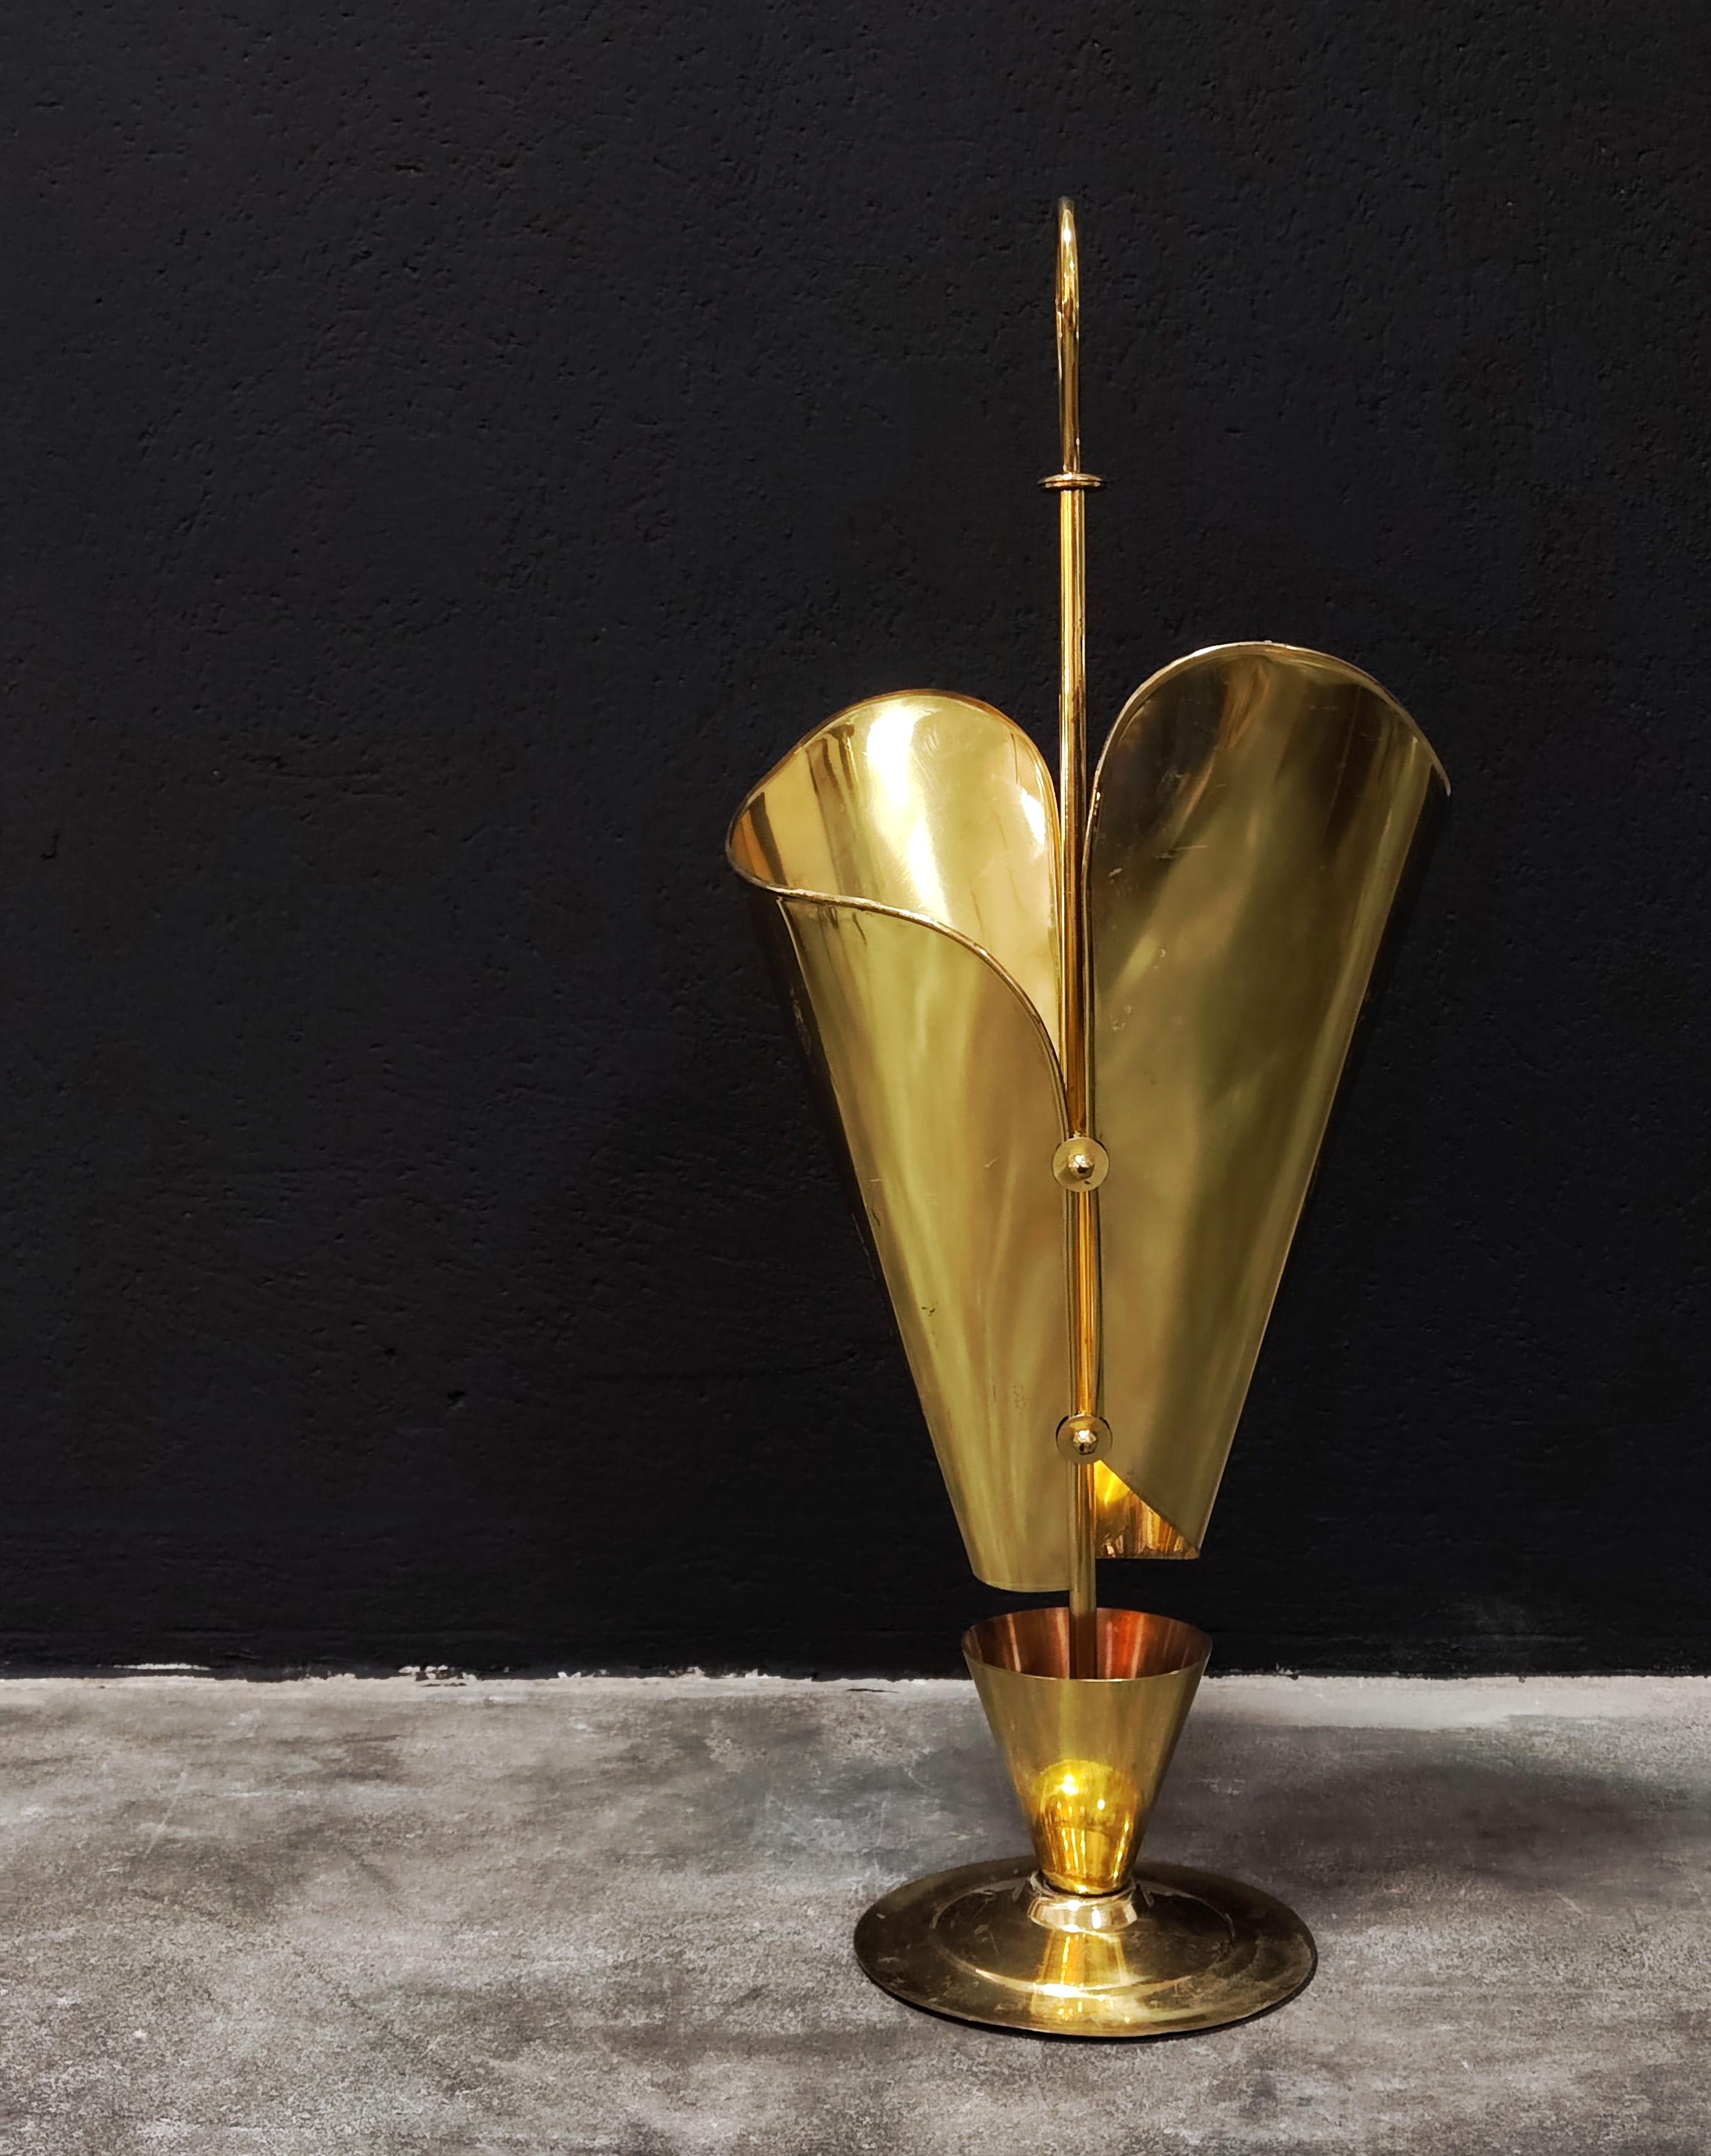 In this listing you will find a very rare and extremly elegant Hollywood regency asymmetrical umbrella stand done entirely in brass. Made in Italy in 1950s.

Very good vintage condition with some signs of time and use such as patina.

When